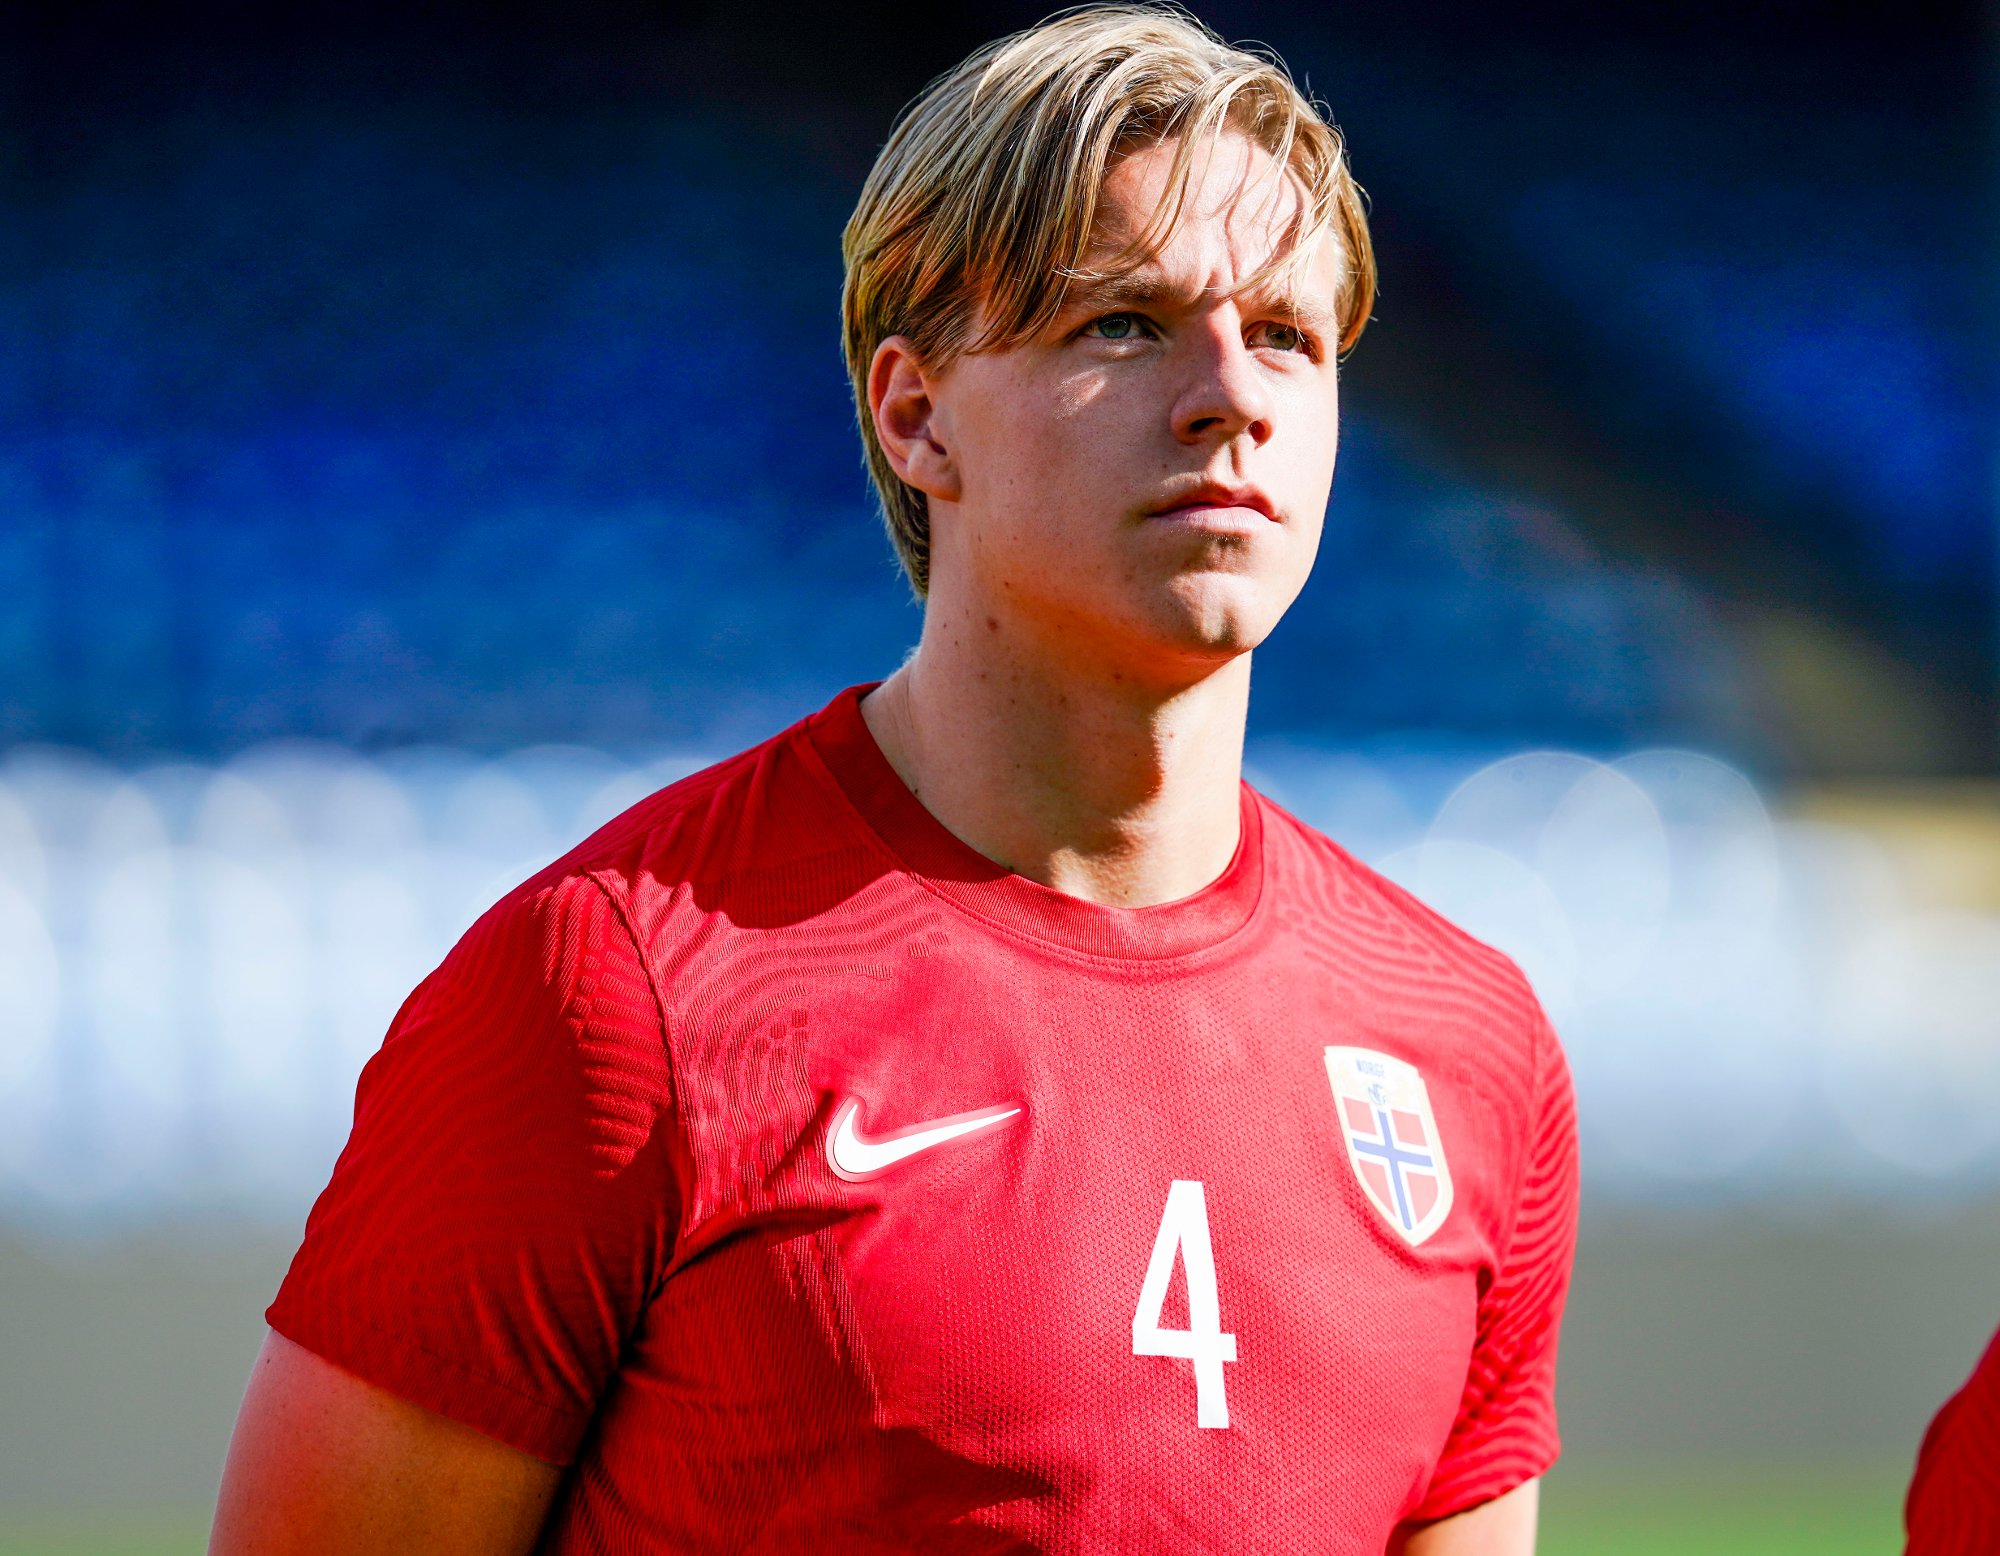 Norway U-21 Football |  The Under-21 national team player impressed during training at a major French club